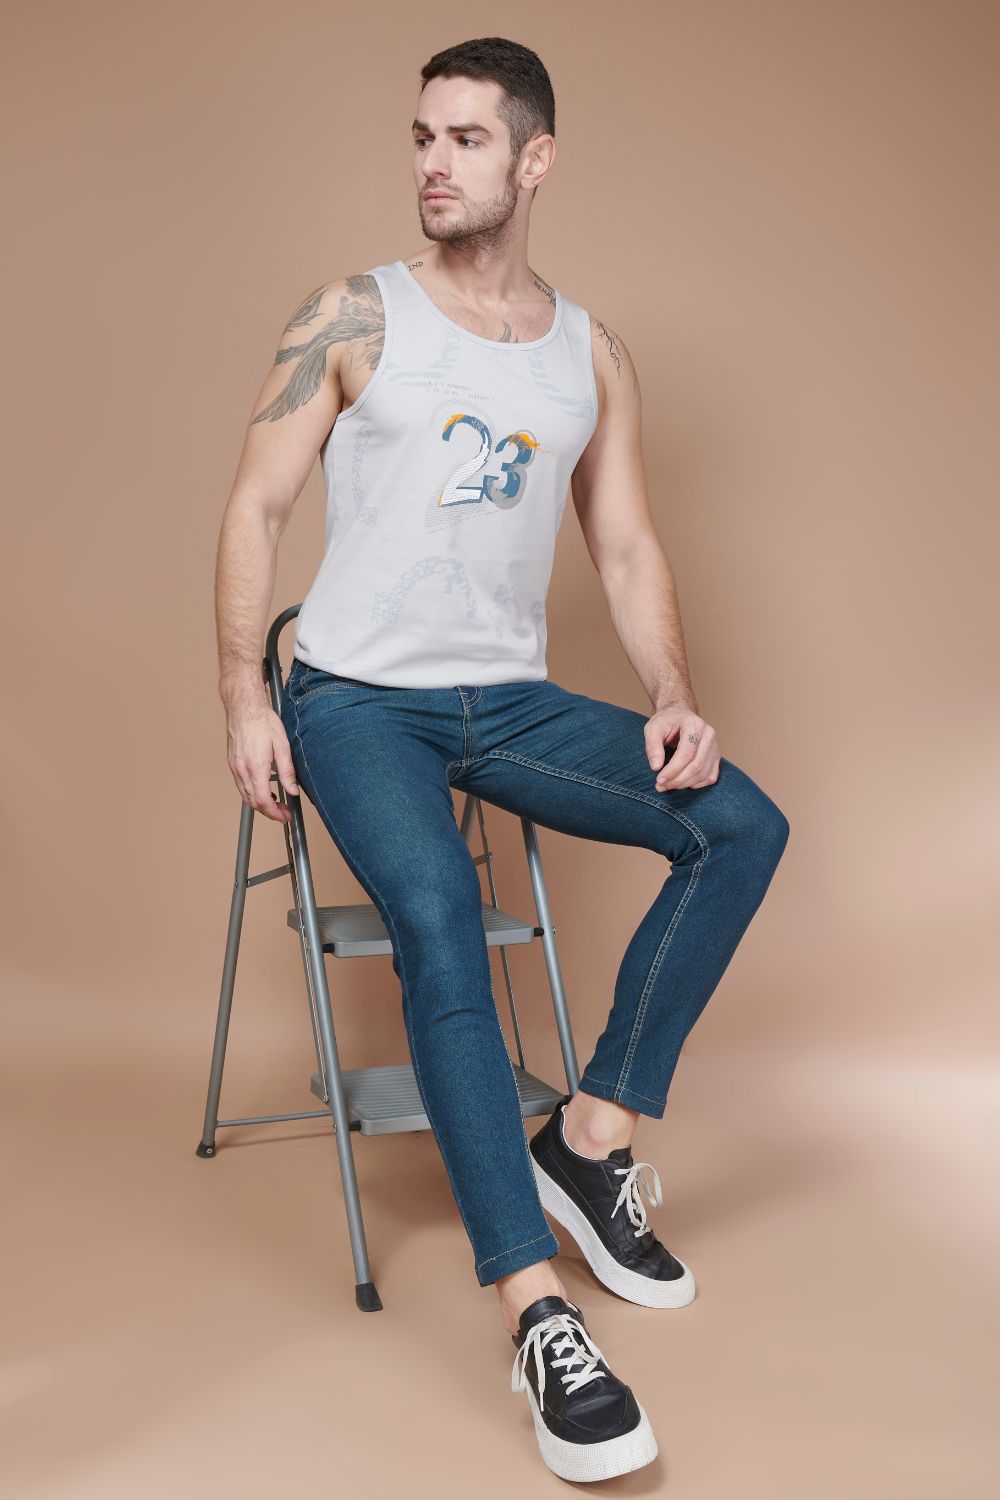 Vapour Blue colored cotton Sleeveless Printed Tank Tees for men.